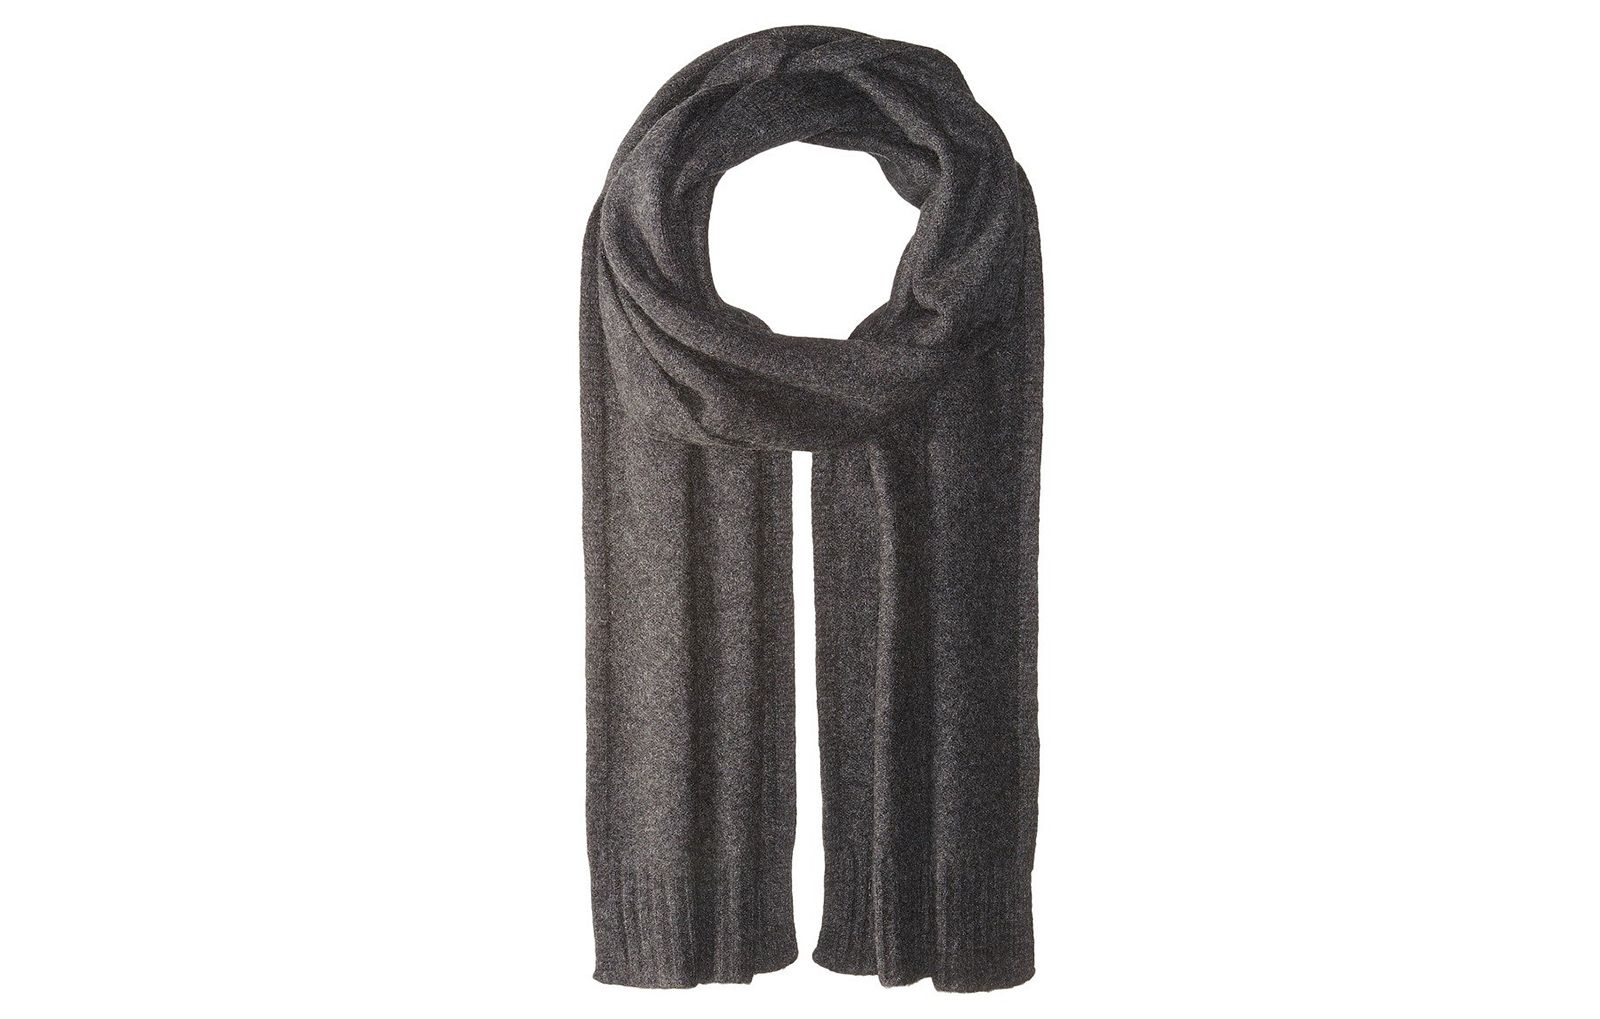 SCARF ONLY $148 KENNETH COLE REACTION MEN'S BLACK LOGO KNIT WARM WINTER SCARF 